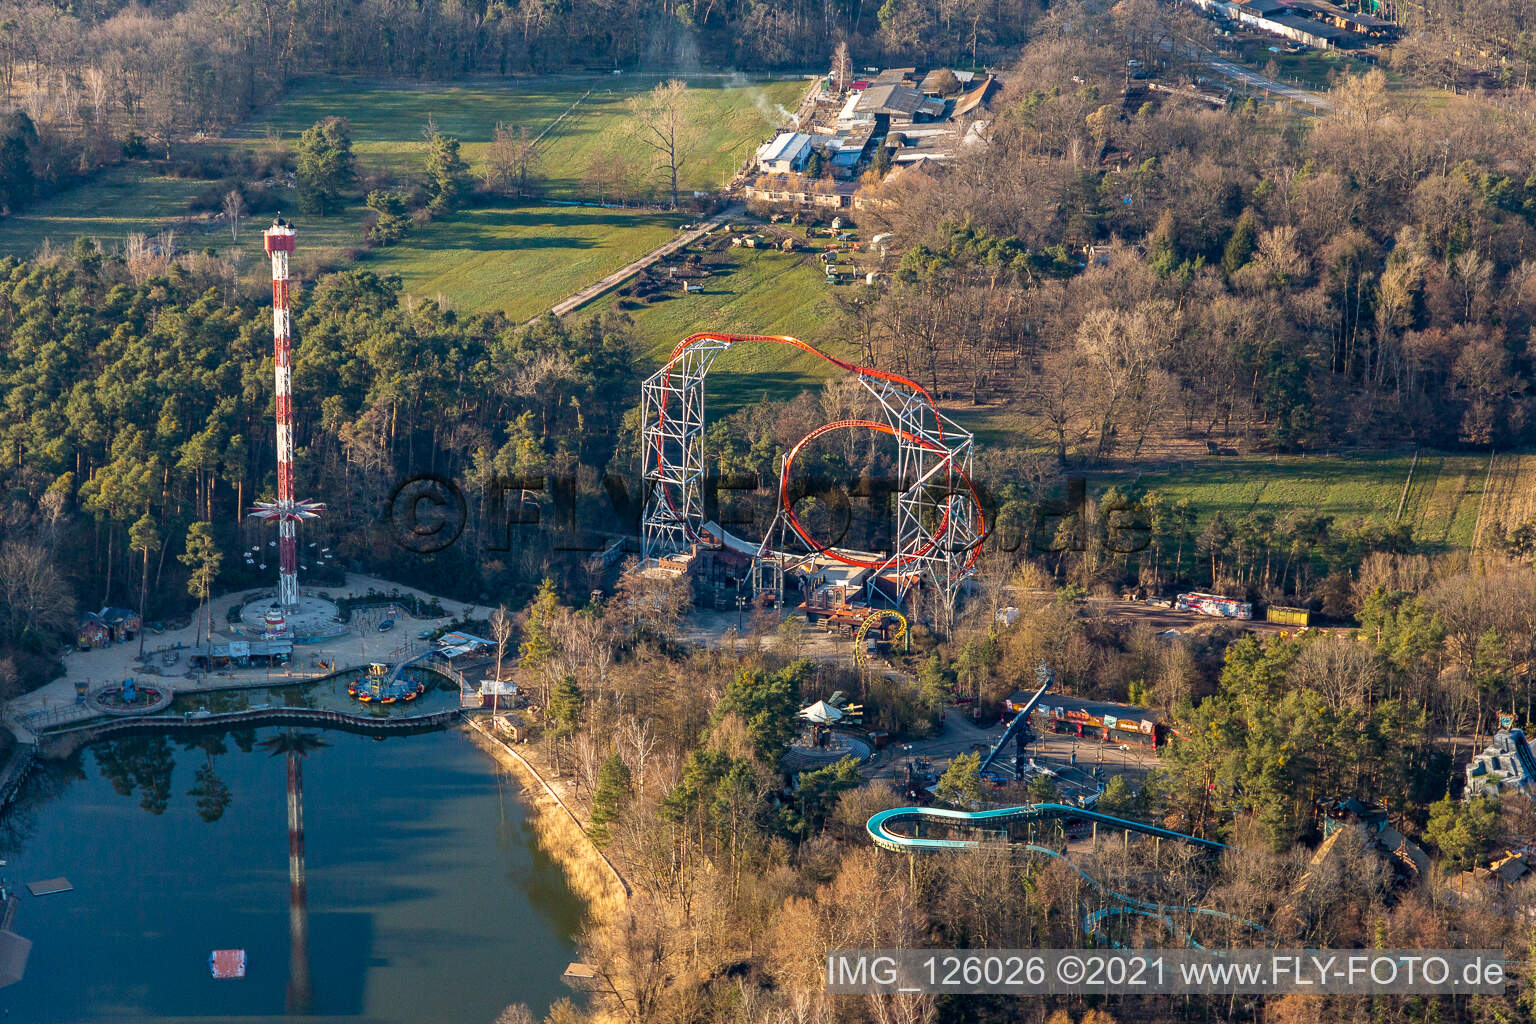 Aerial view of Leisure Centre - Amusement Park Holiday Park GmbH on Holidayparkstrasse in Hassloch in the state Rhineland-Palatinate